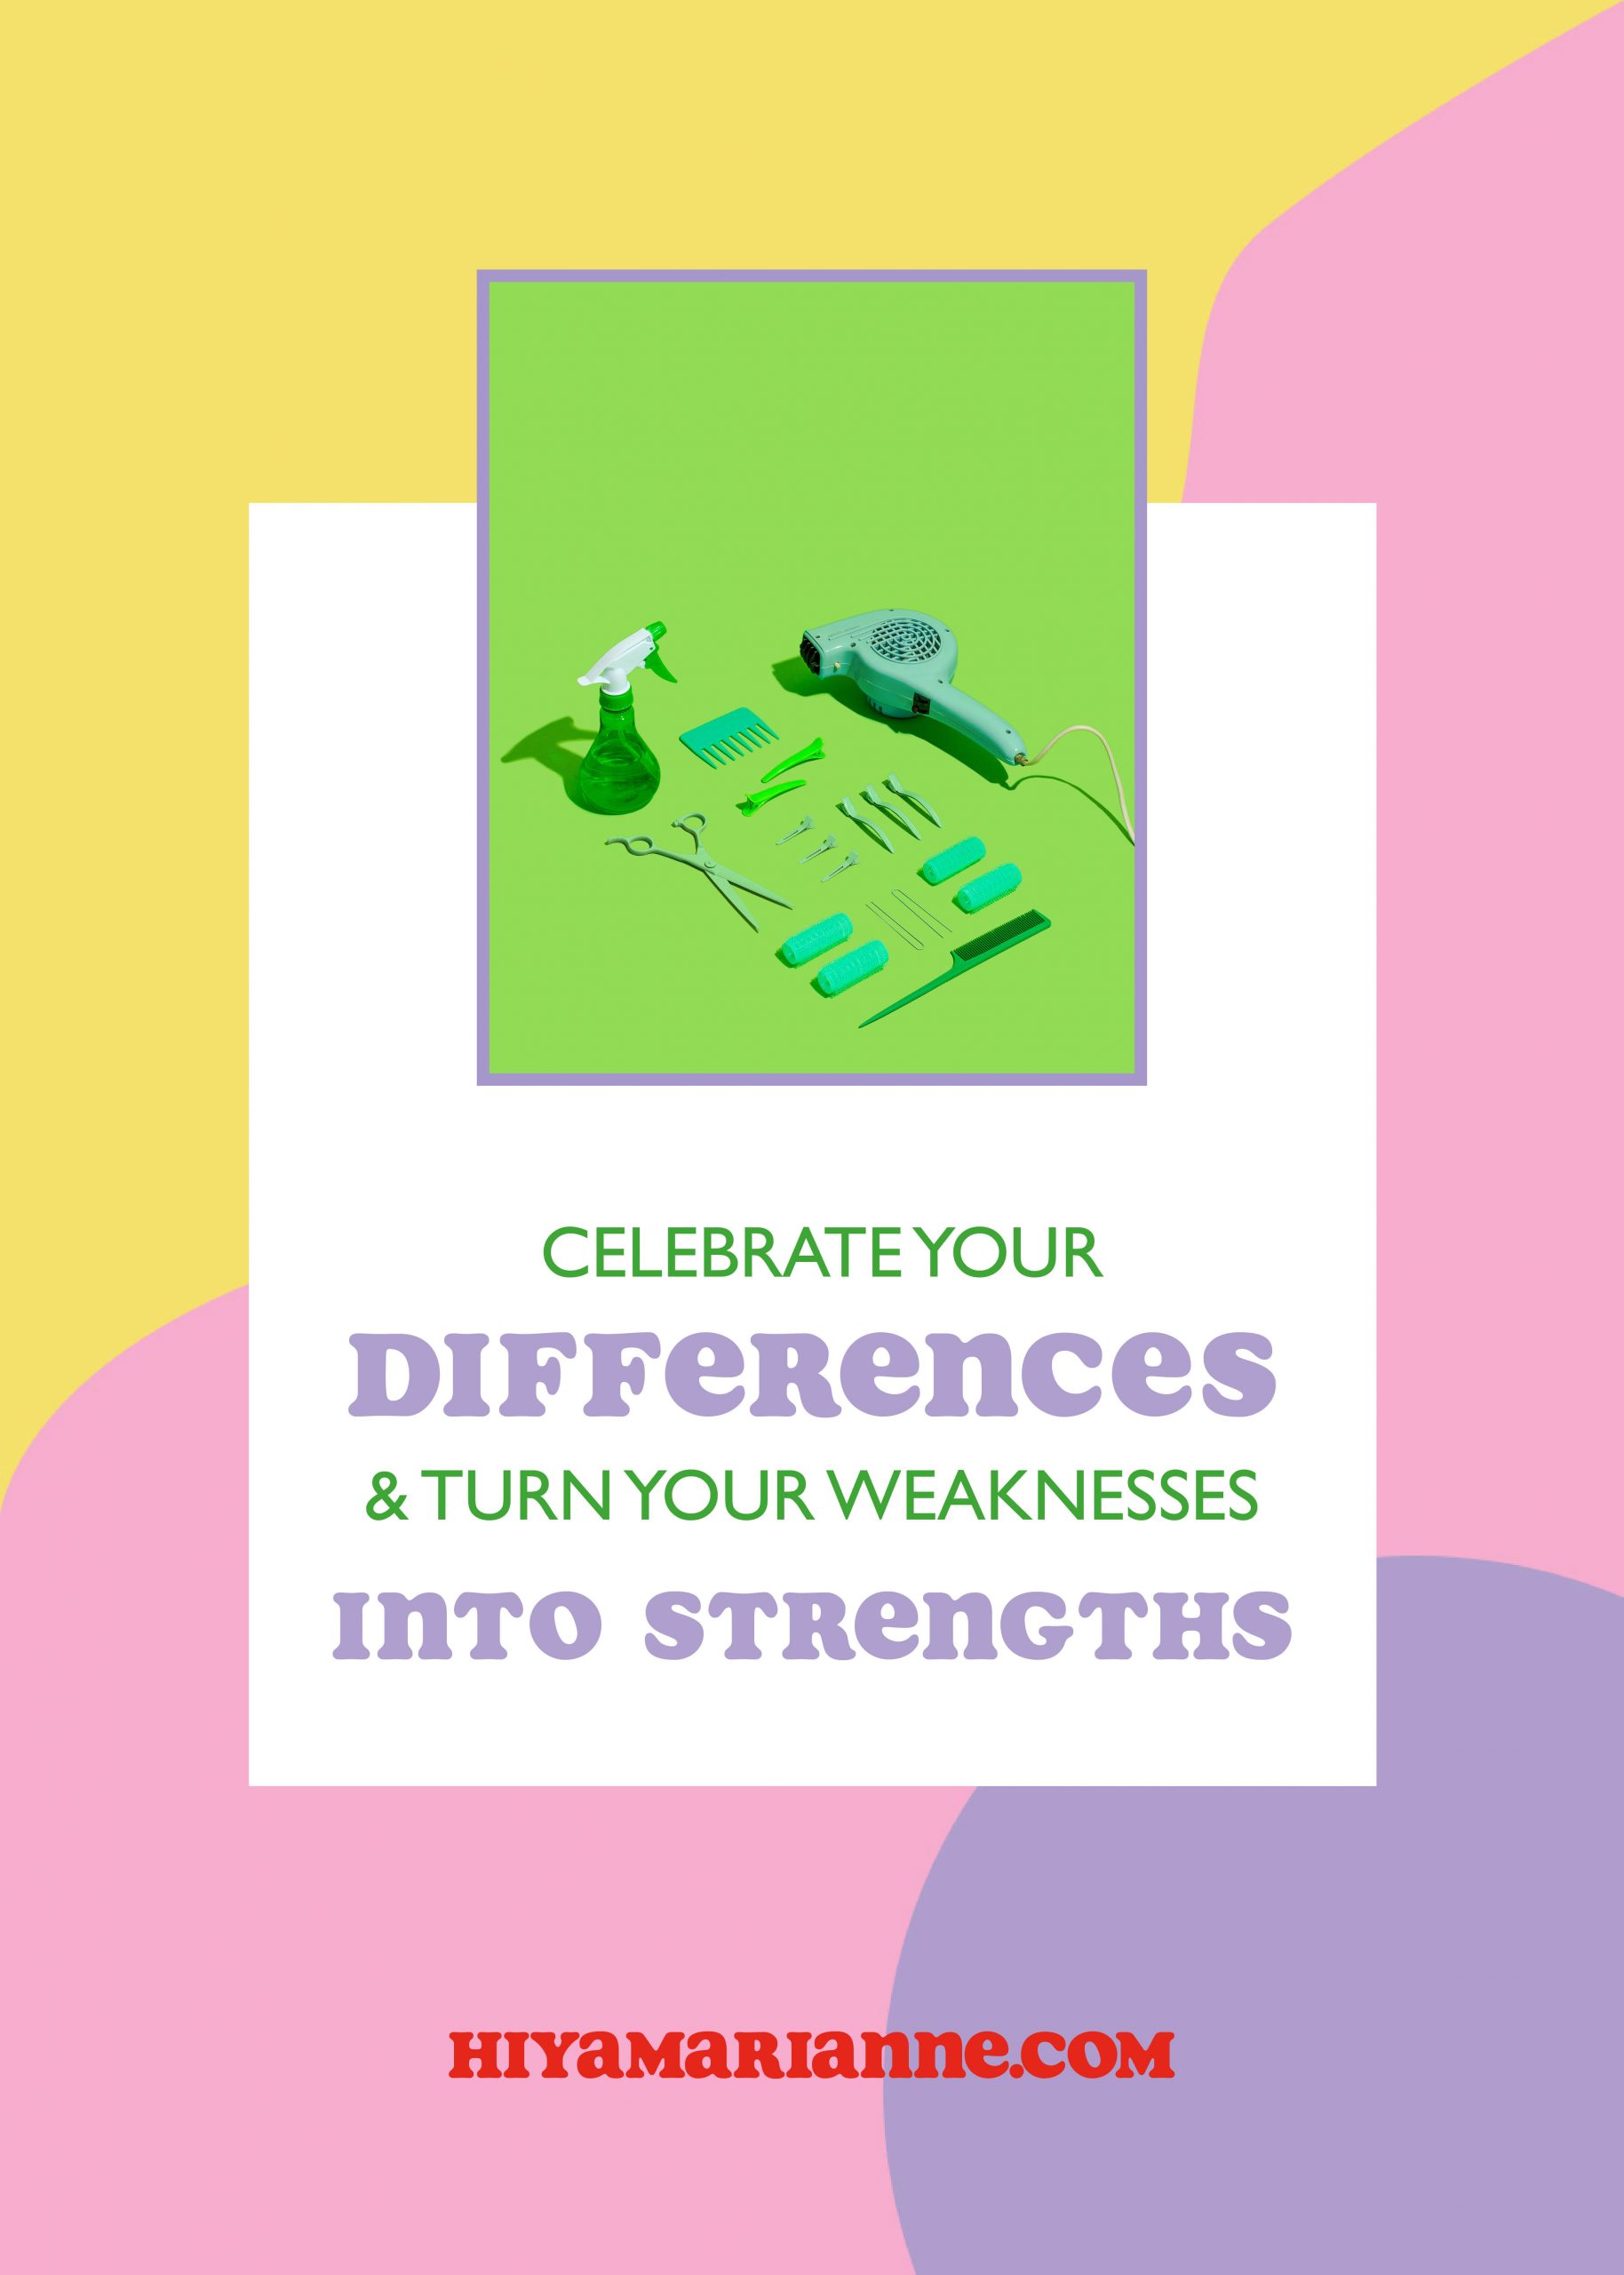 Celebrate your differences and turn your weaknesses into your strengths - by HIYA MARIANNE.